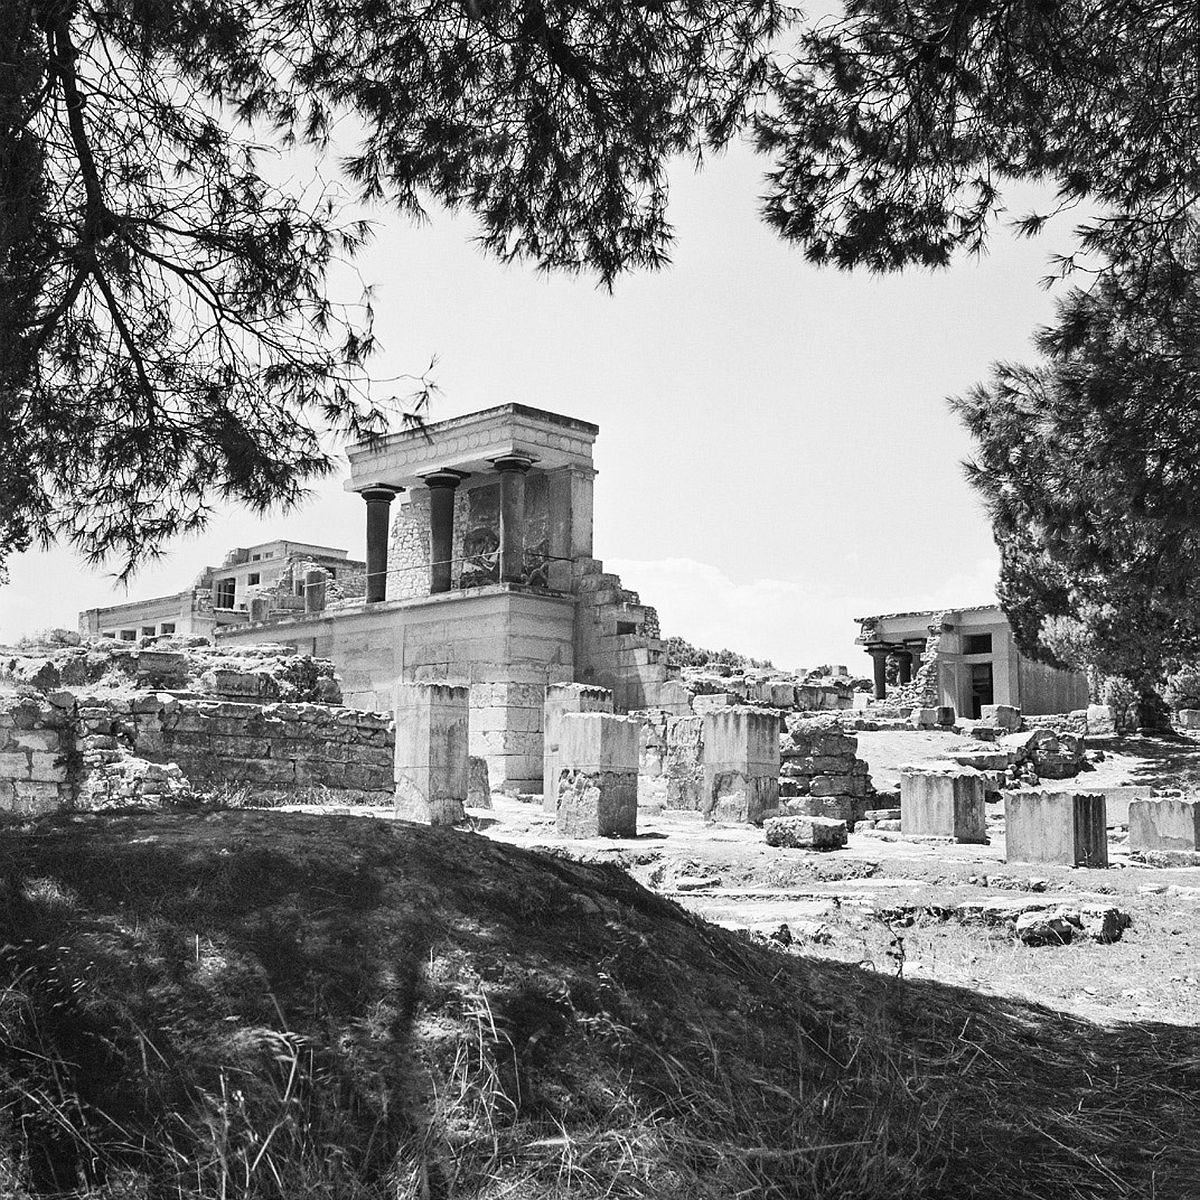 Knossos. Photograph by Robert McCabe on show in the exhibition “Chronography-An Exhibition for the 180th anniversary (1837-2017) of the Archaeological Society”.